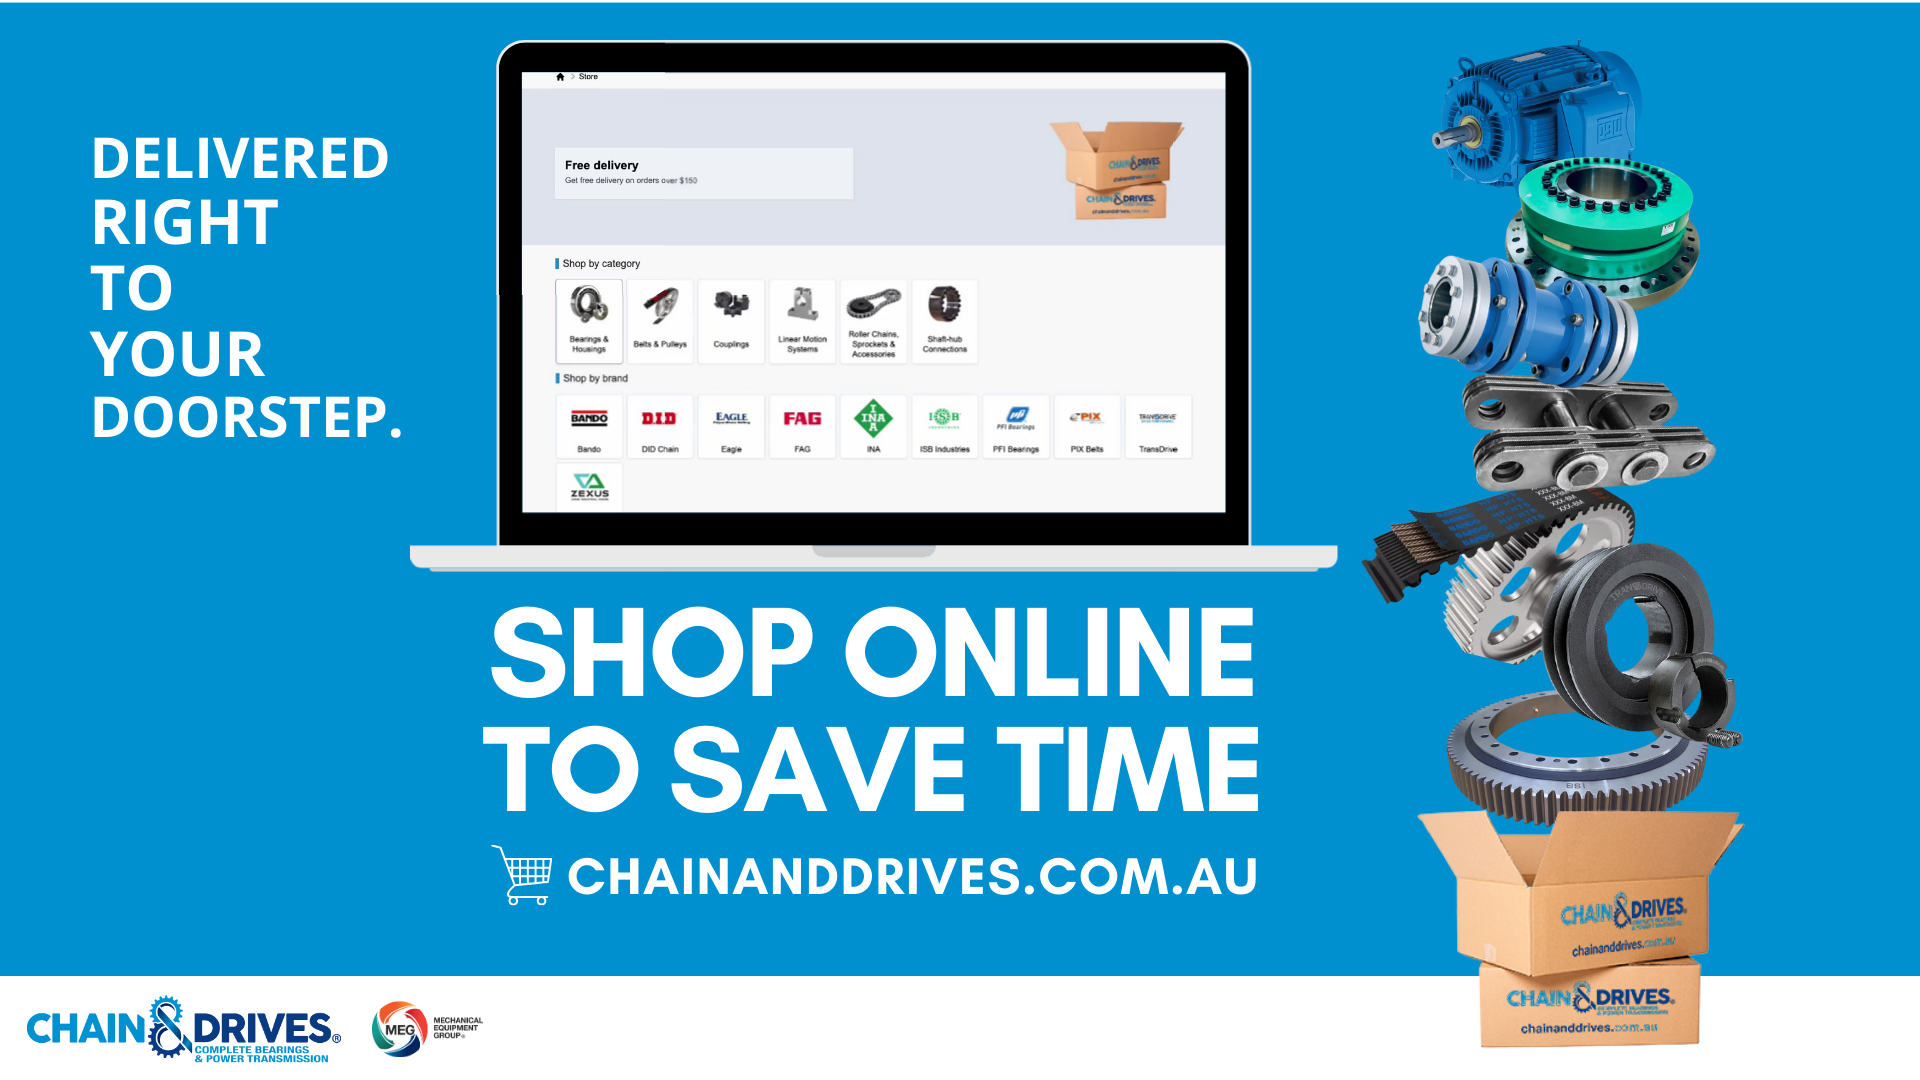 Ready to start shopping online? Our Online Store is Now Open